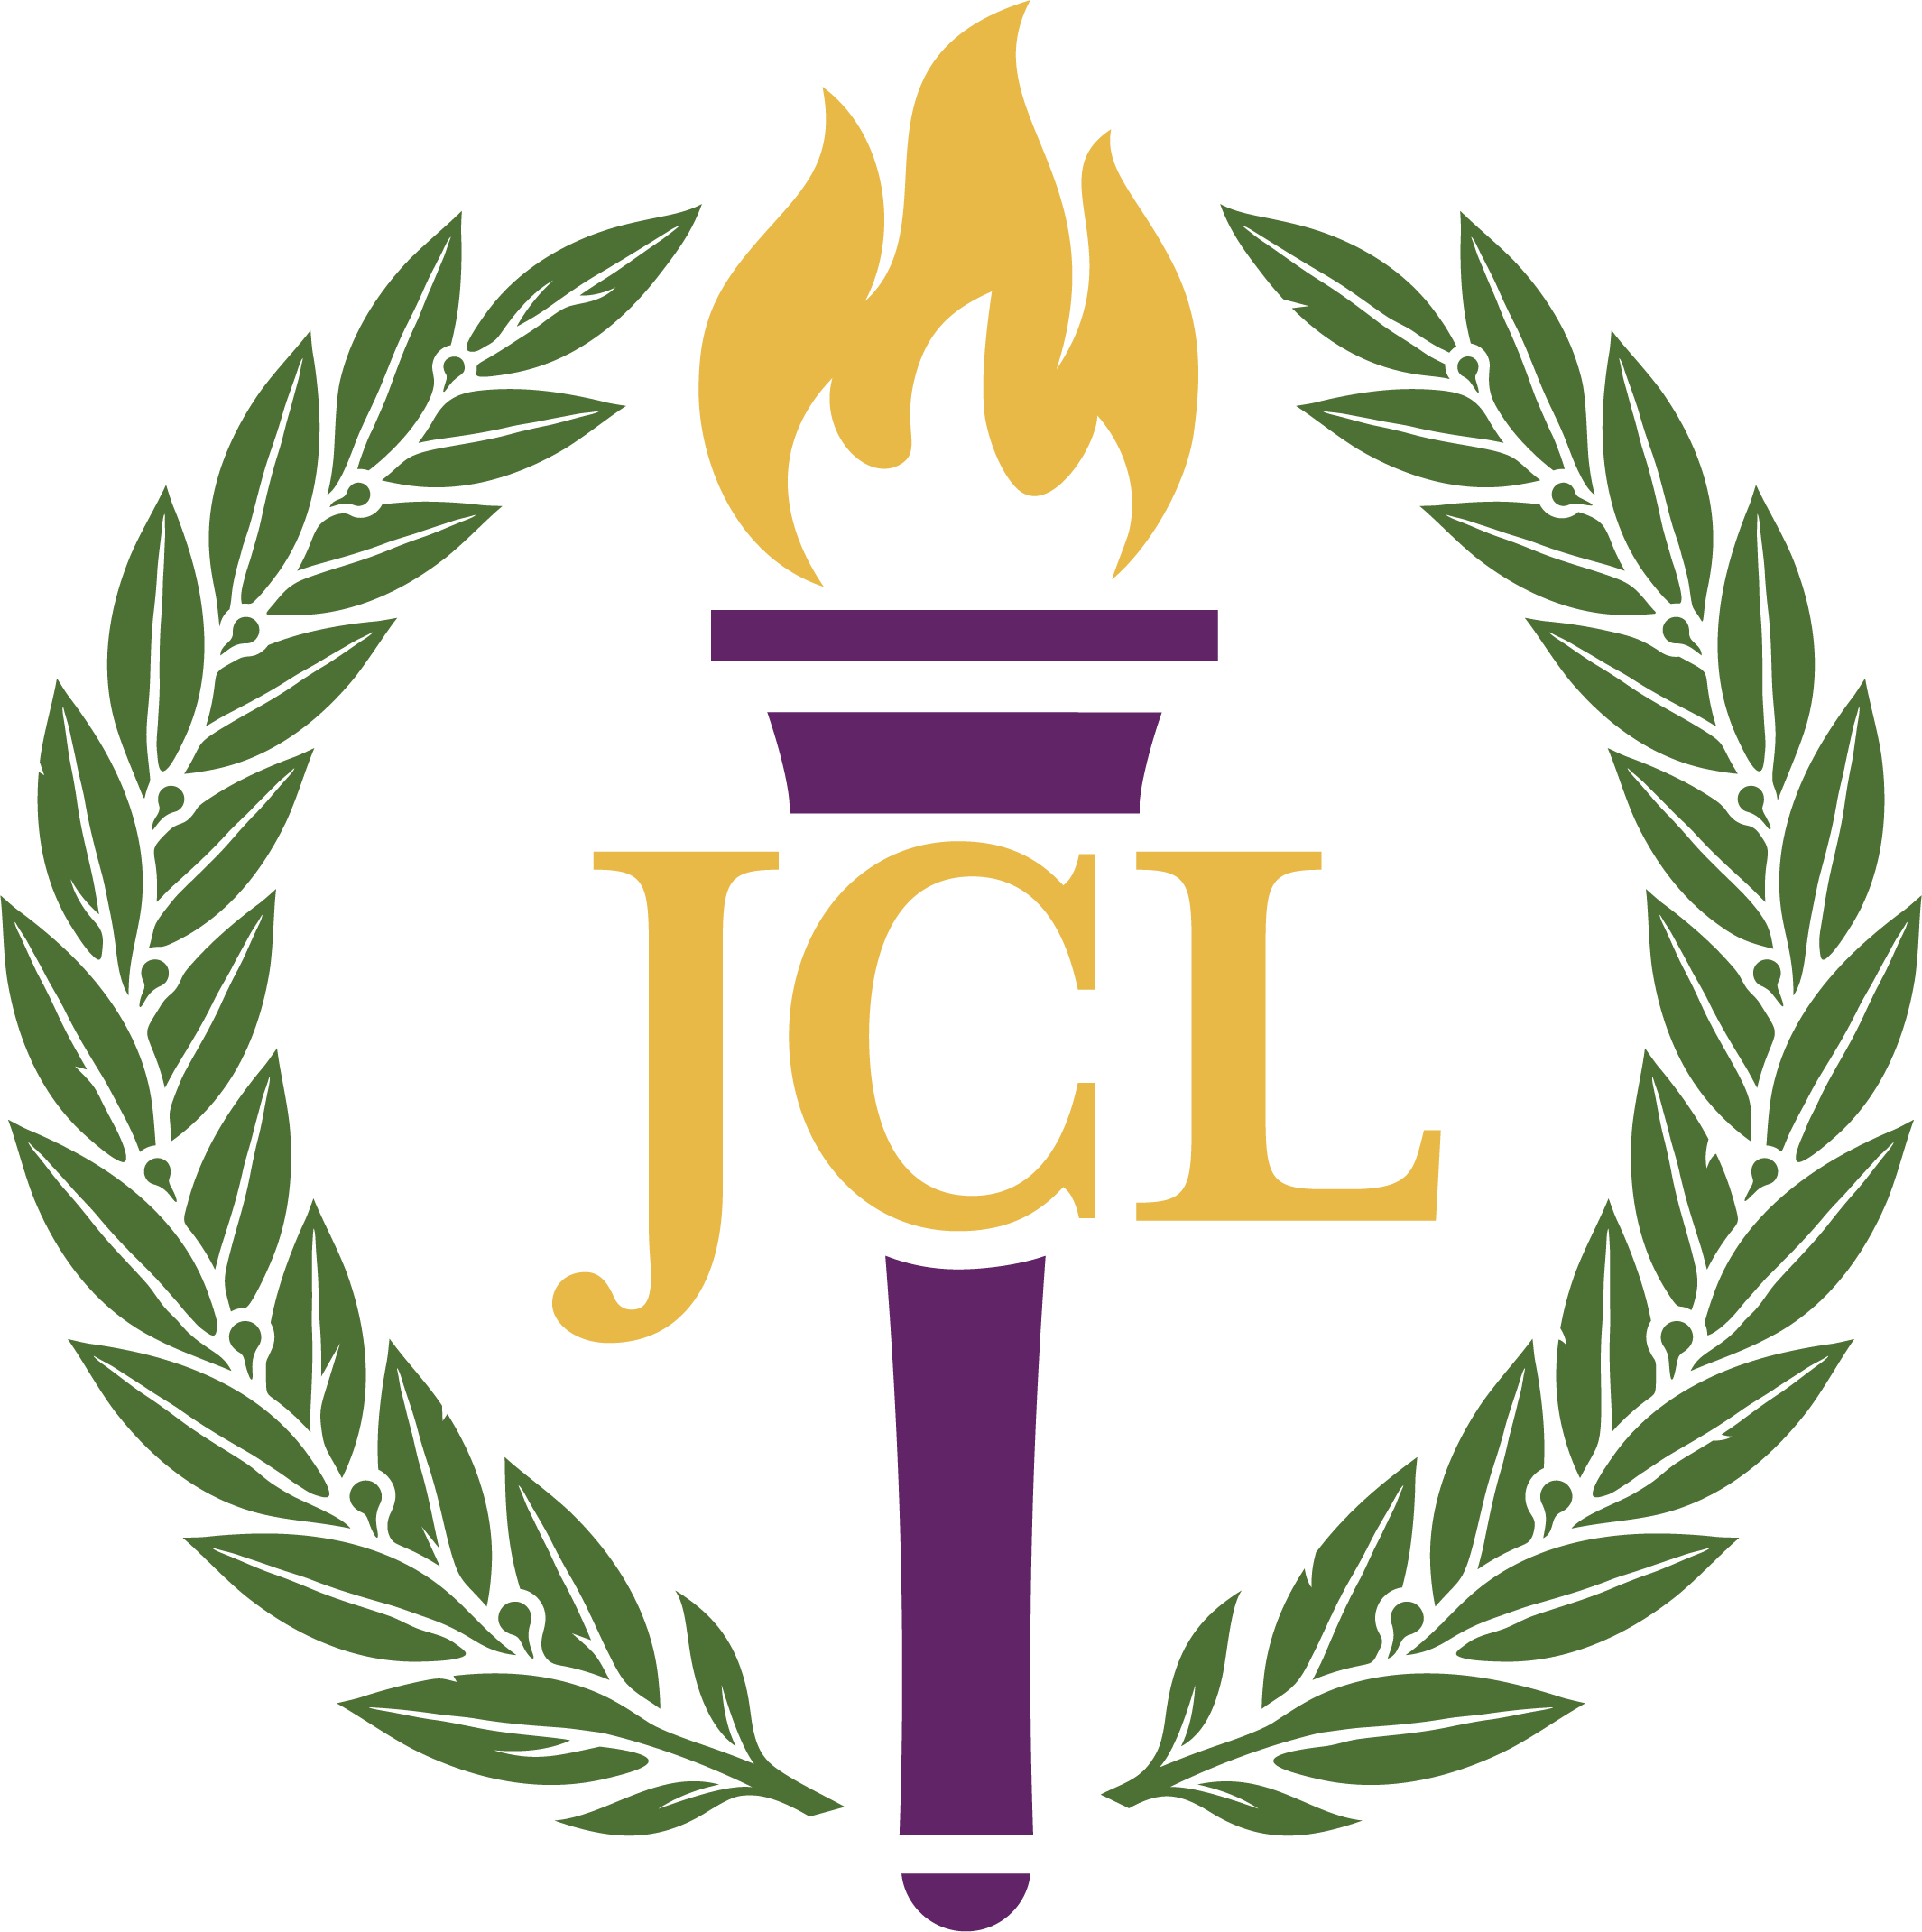 JCL_wreath.png